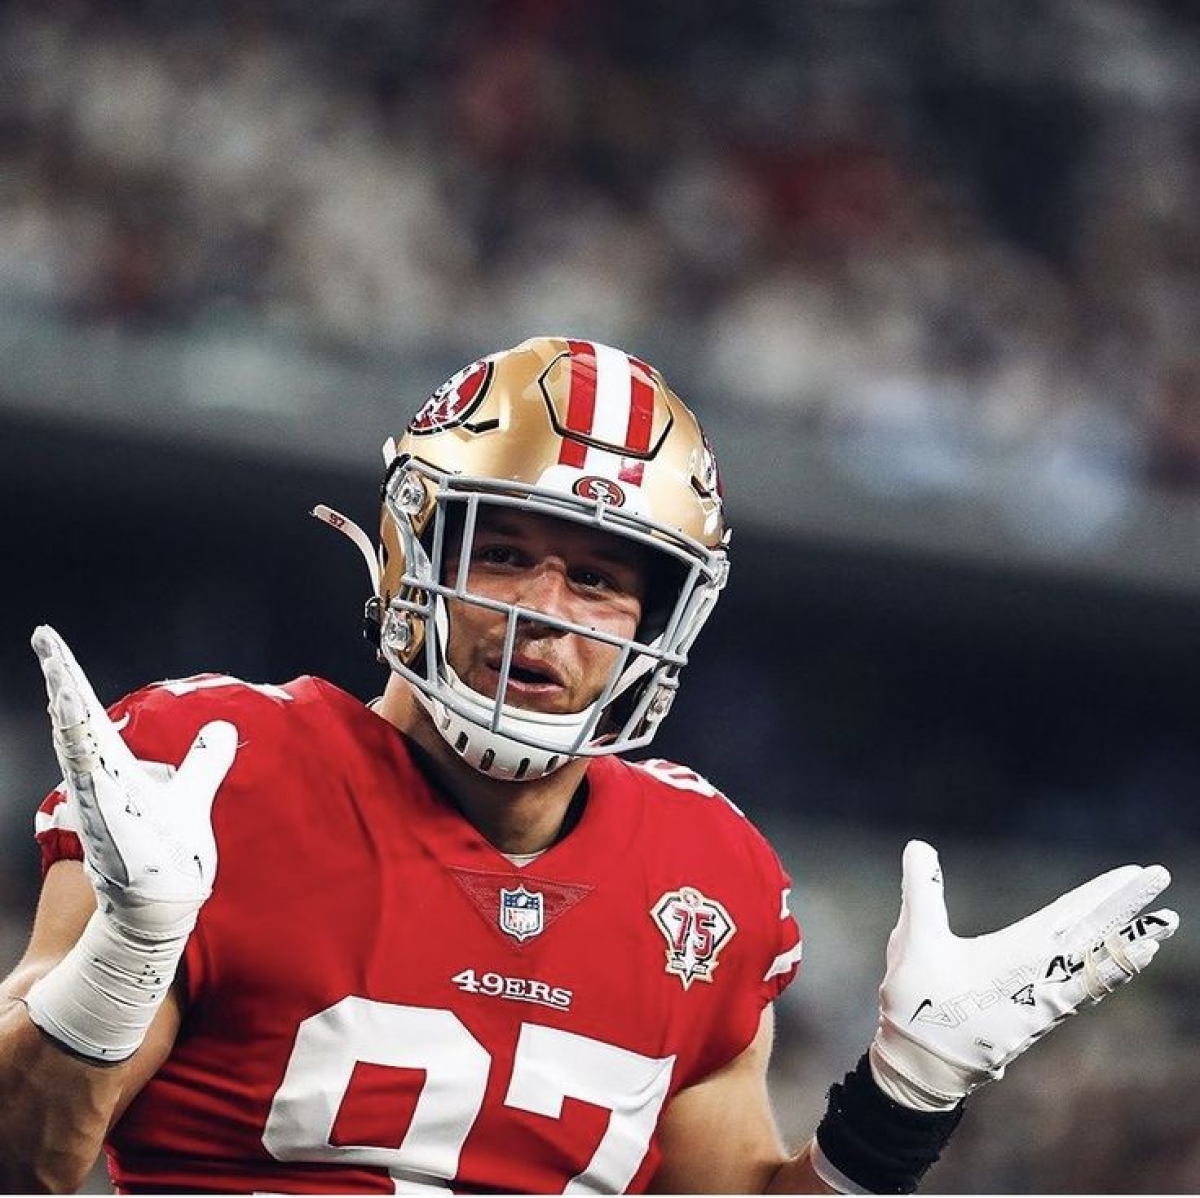 Not in Hall of Fame - #85 Overall, Nick Bosa, San Francisco 49ers, #12  Defensive End